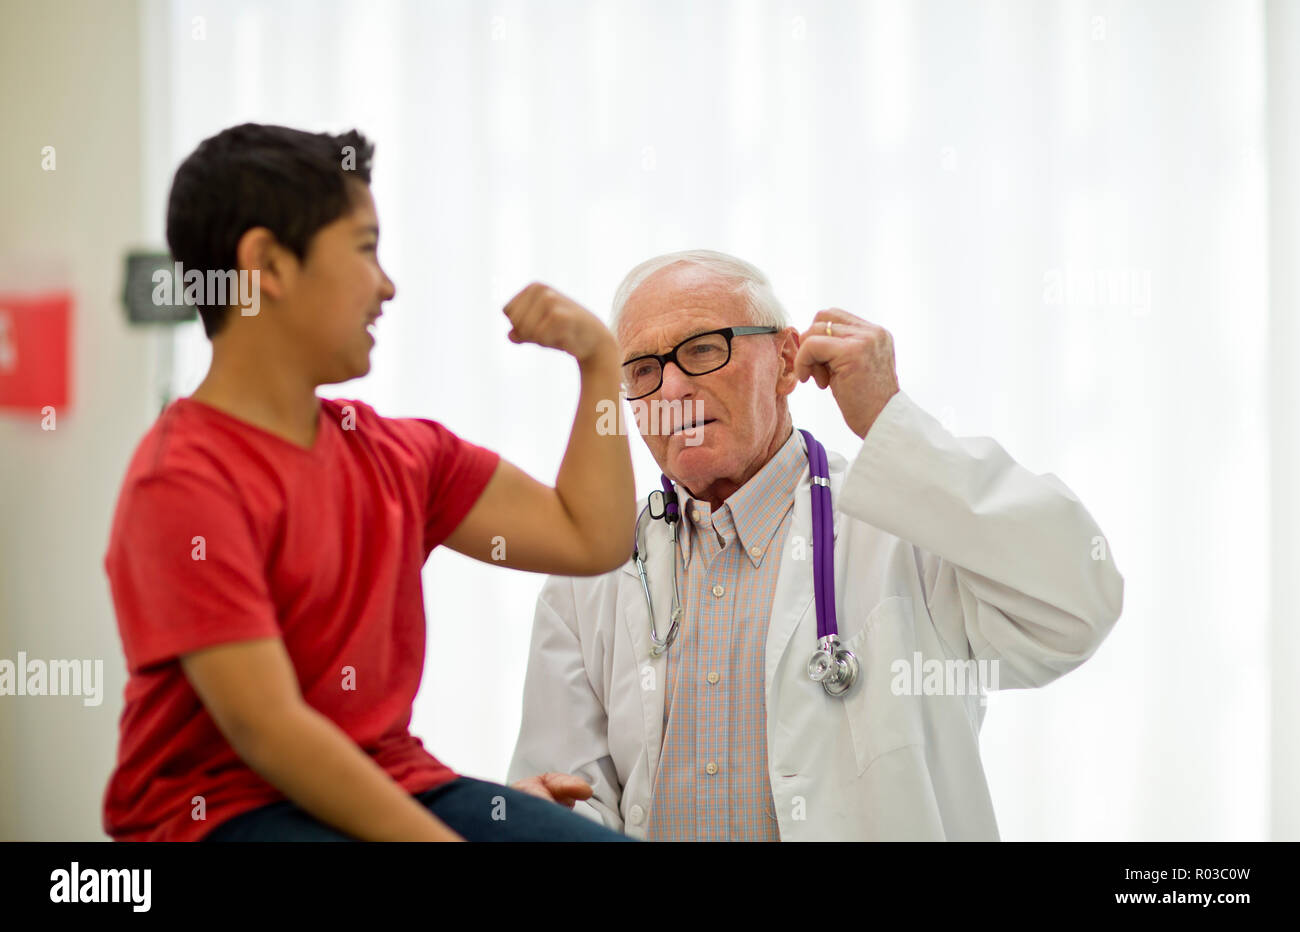 Playful young boy flexing his muscles at a doctor's office. Stock Photo